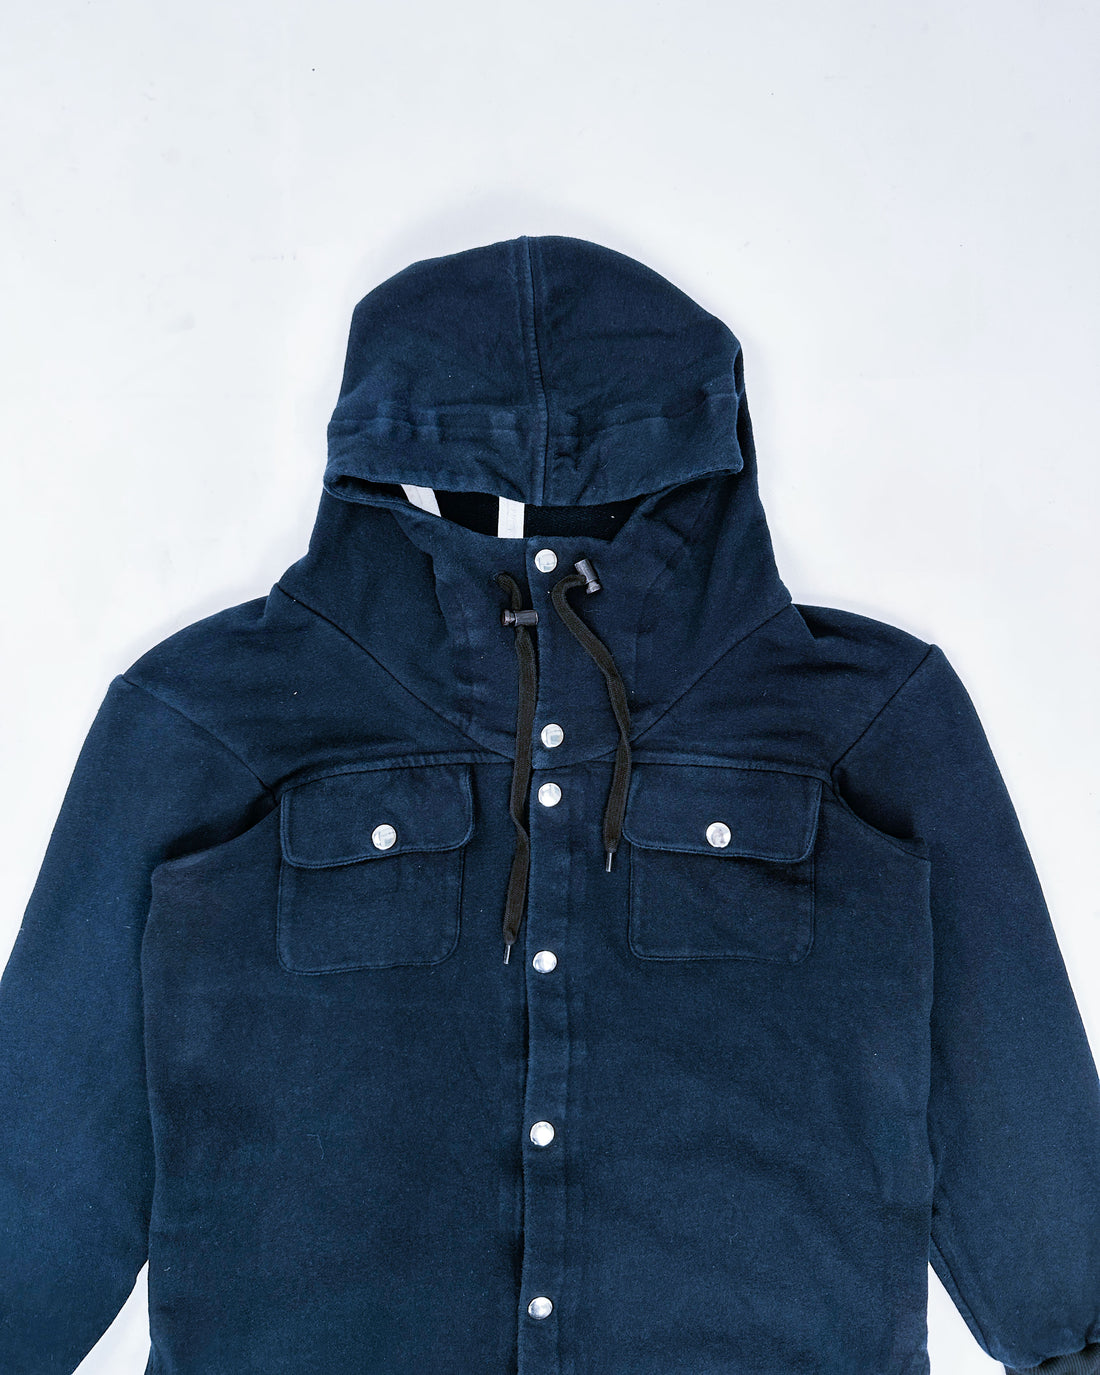 Marni Buttoned Navy Hoodie 2000's